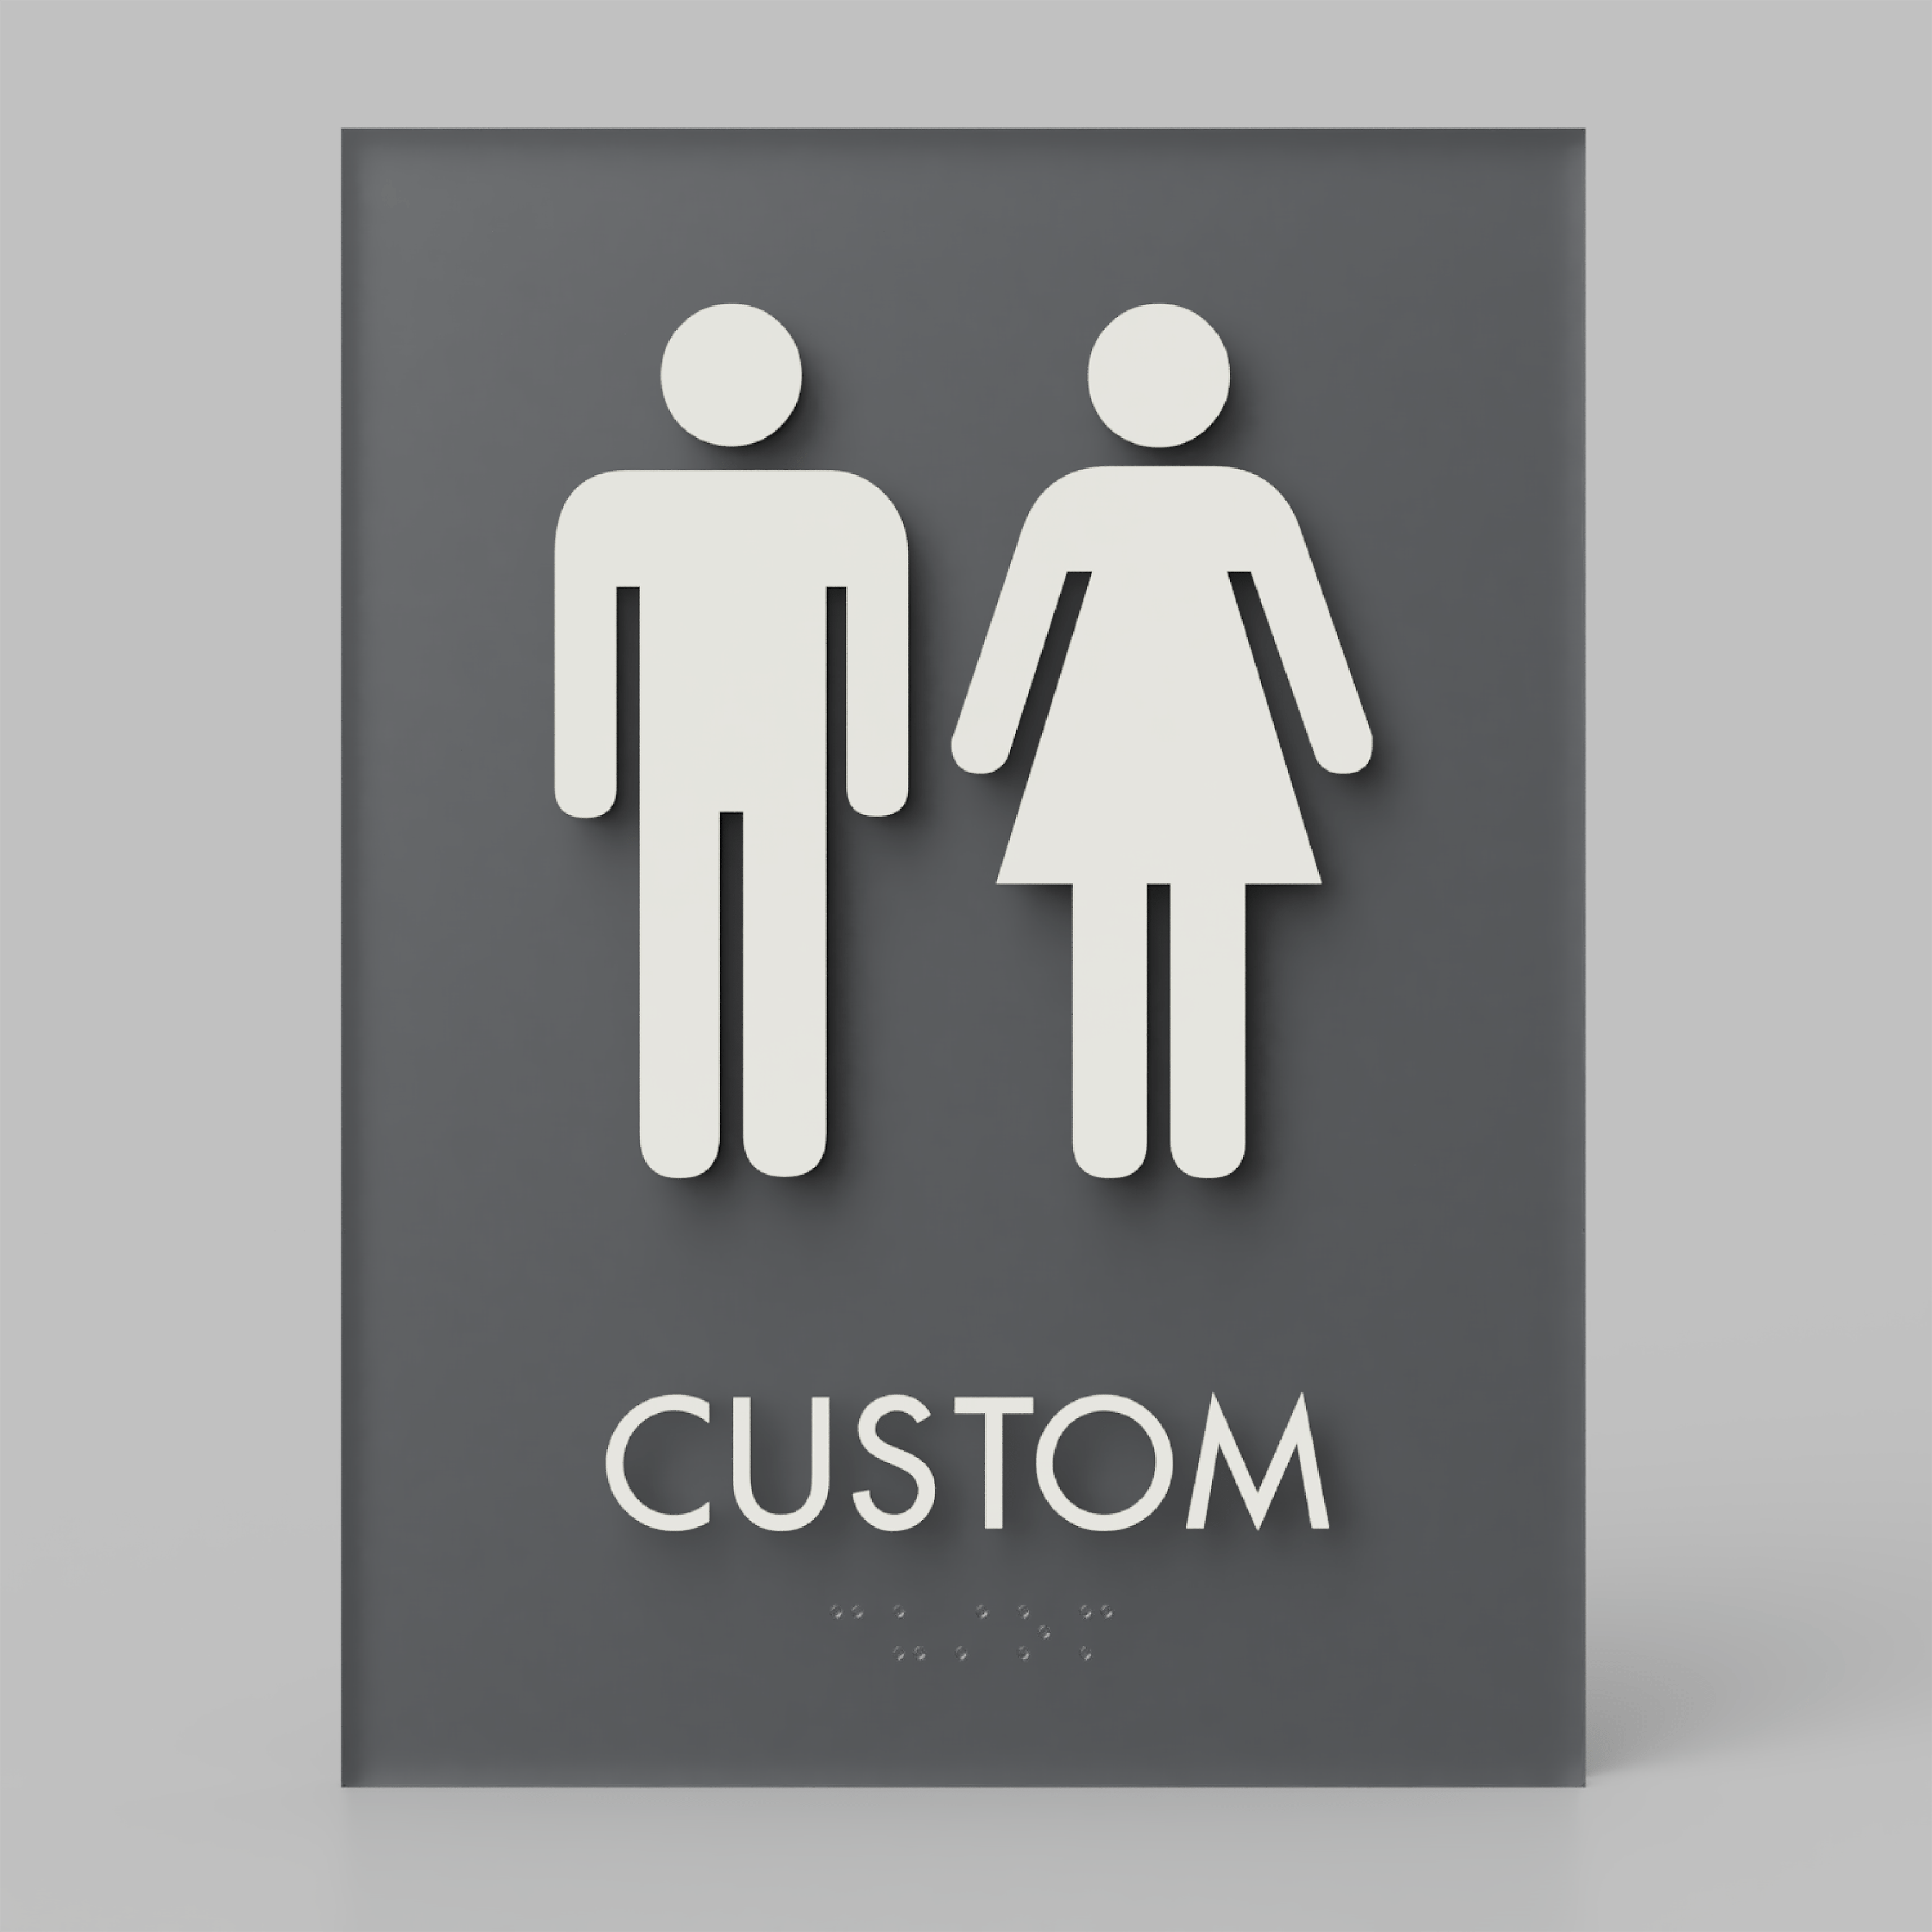 Harper Laine Shop Tier 1 - Acrylic Cool Gray / 1/4" / Unisex Restroom ID A, Customizable 1 Line Text, 6″ x 8″, ADA, Reese Series